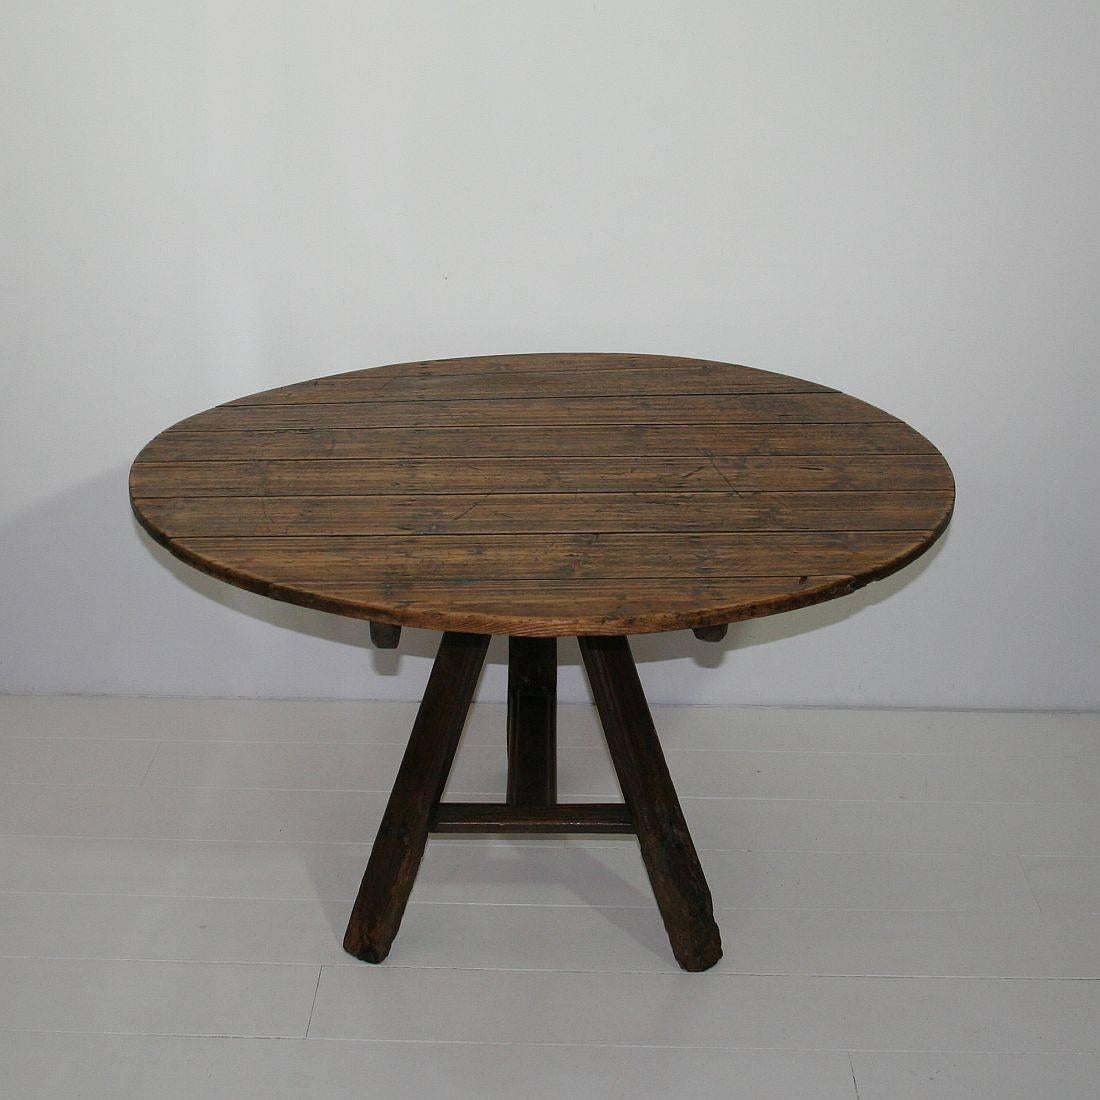 Great folk-art tilt-top table with stunning patina and color. Nice tripod base and wrought iron latch or support. Weathered but despite of its age in a relative good condition.